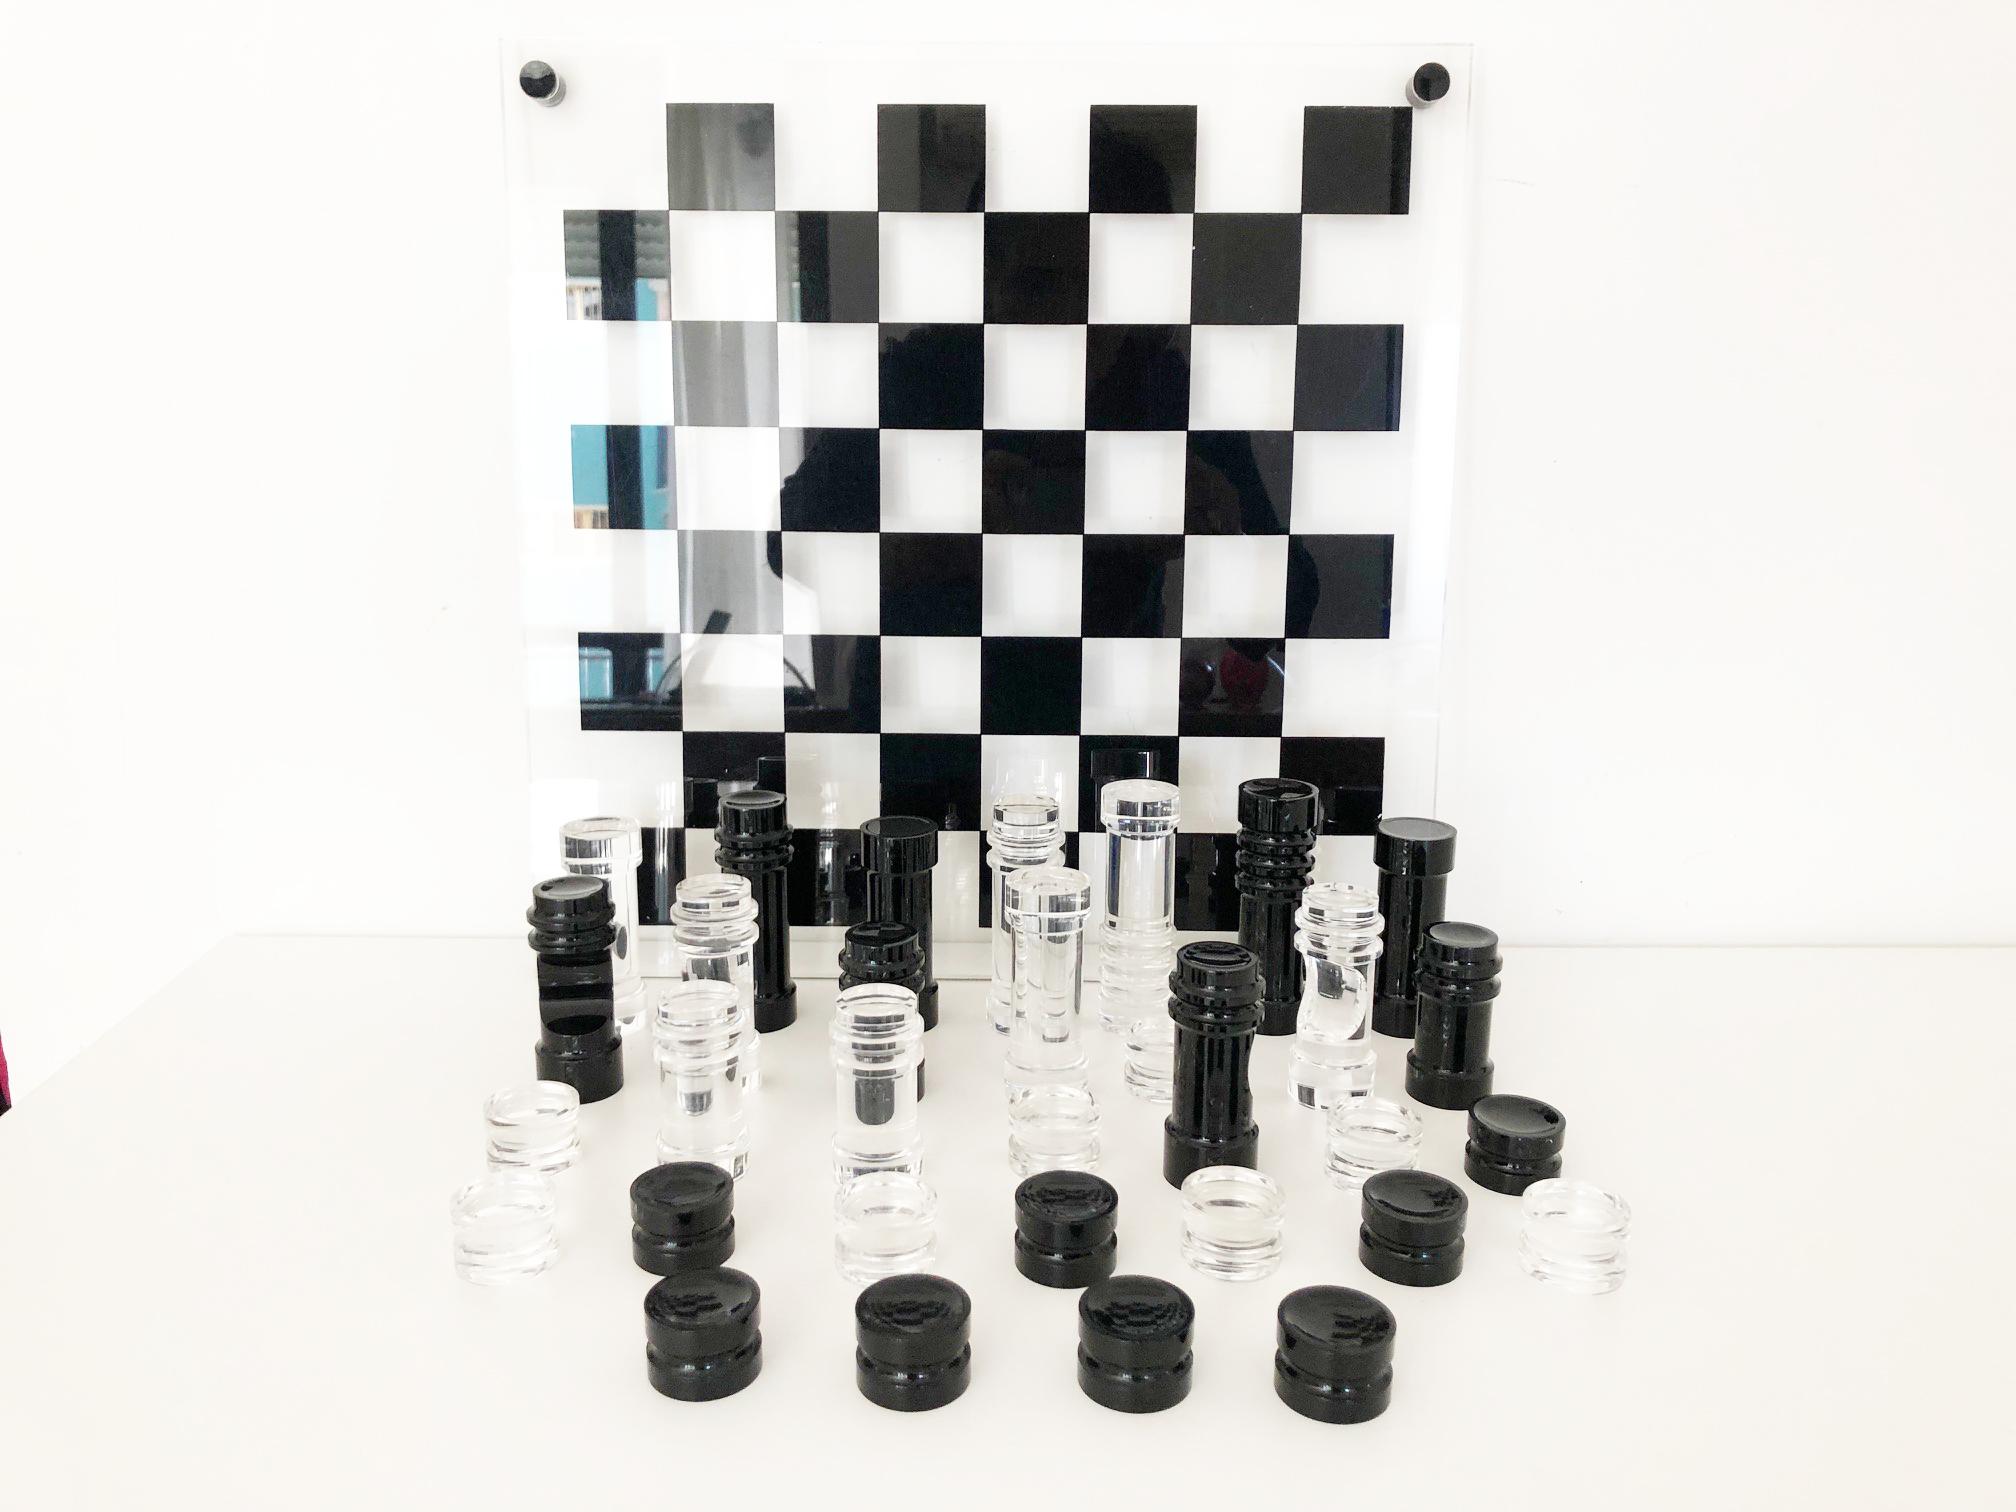 Lucite chessboard by Felice Antonio Botta, original and authentic from the 1970s
Intact and in a good state of conservation, ideal as a prestigious gift to embellish a room by creating a detail of notable effect.